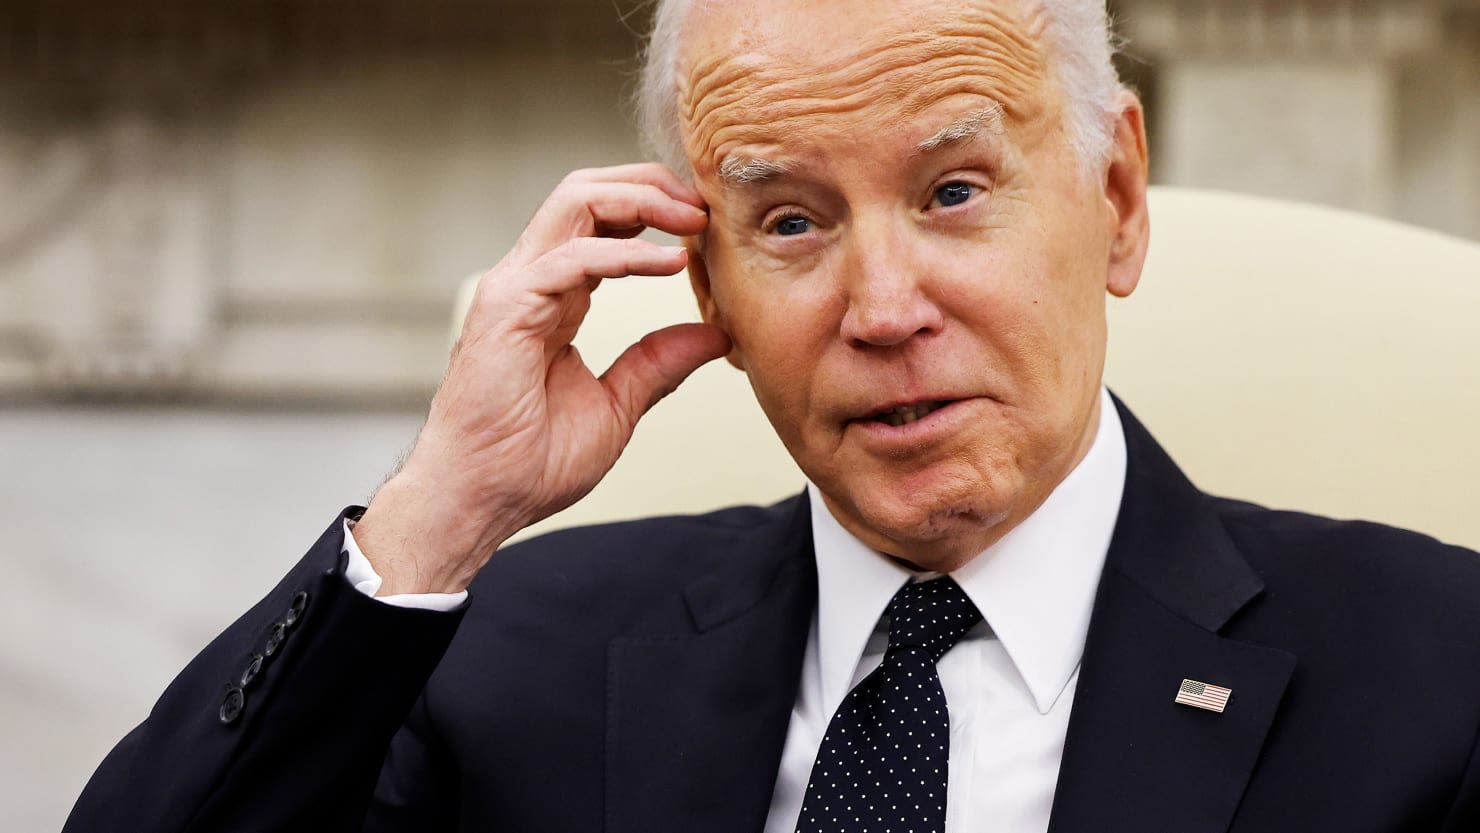 Biden’s Playing Dumb Politics With Threat to Cut Israel Military Aid